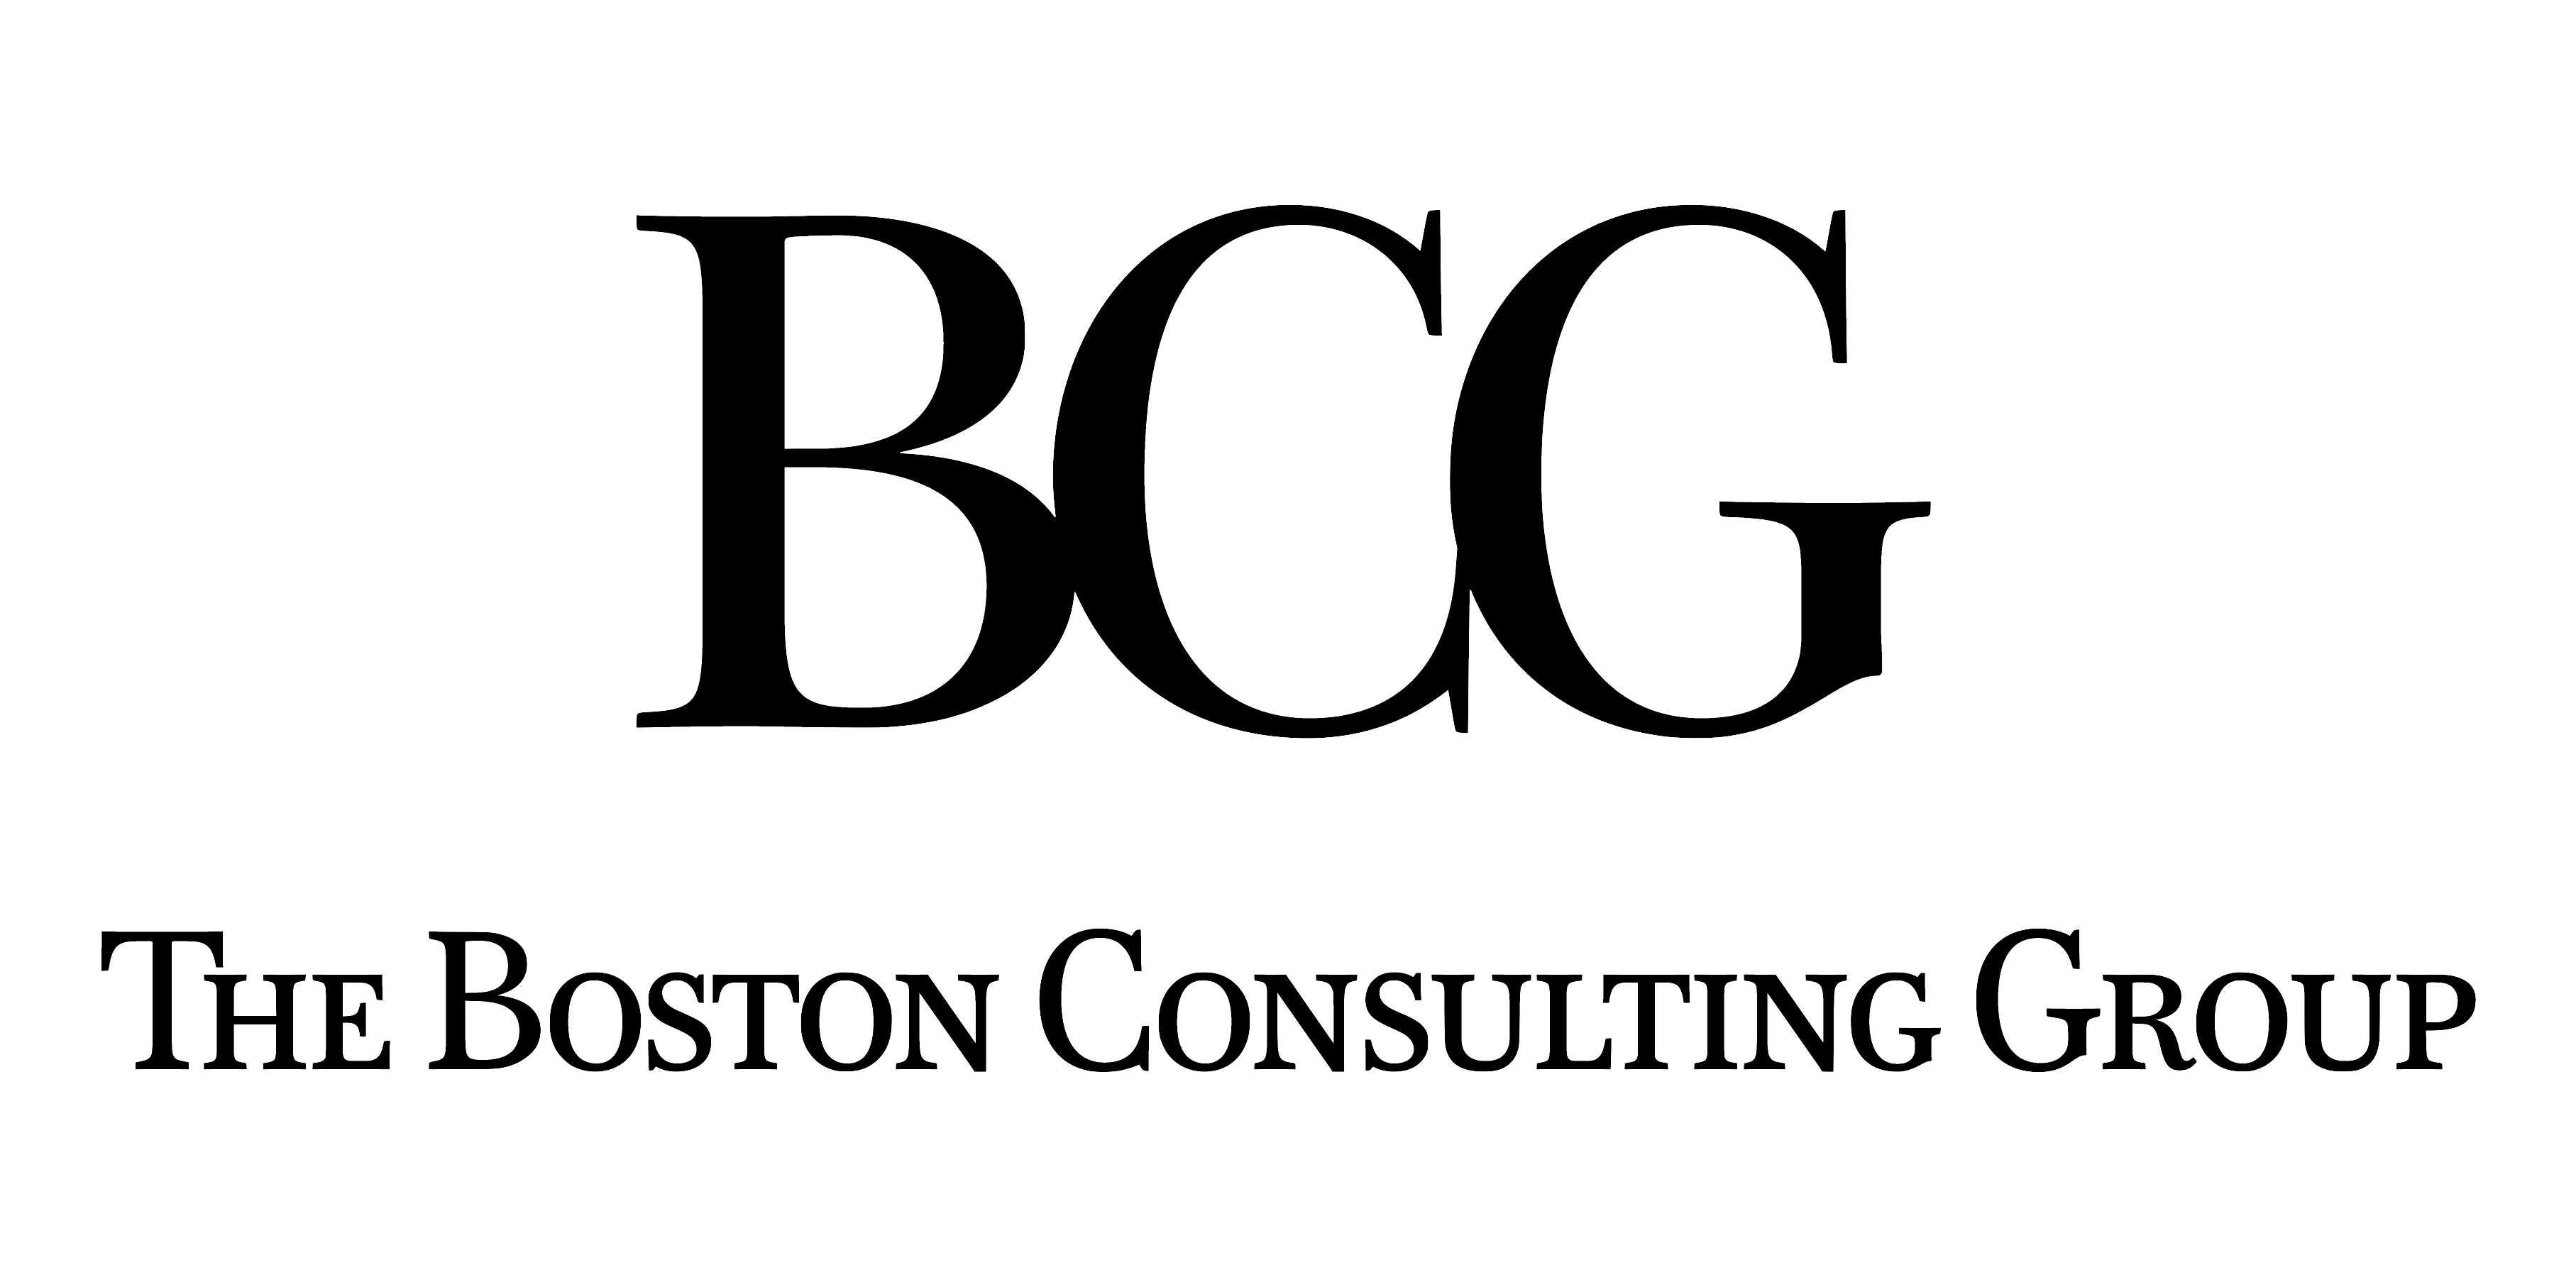 Client - The Boston Consulting Group - Logo black